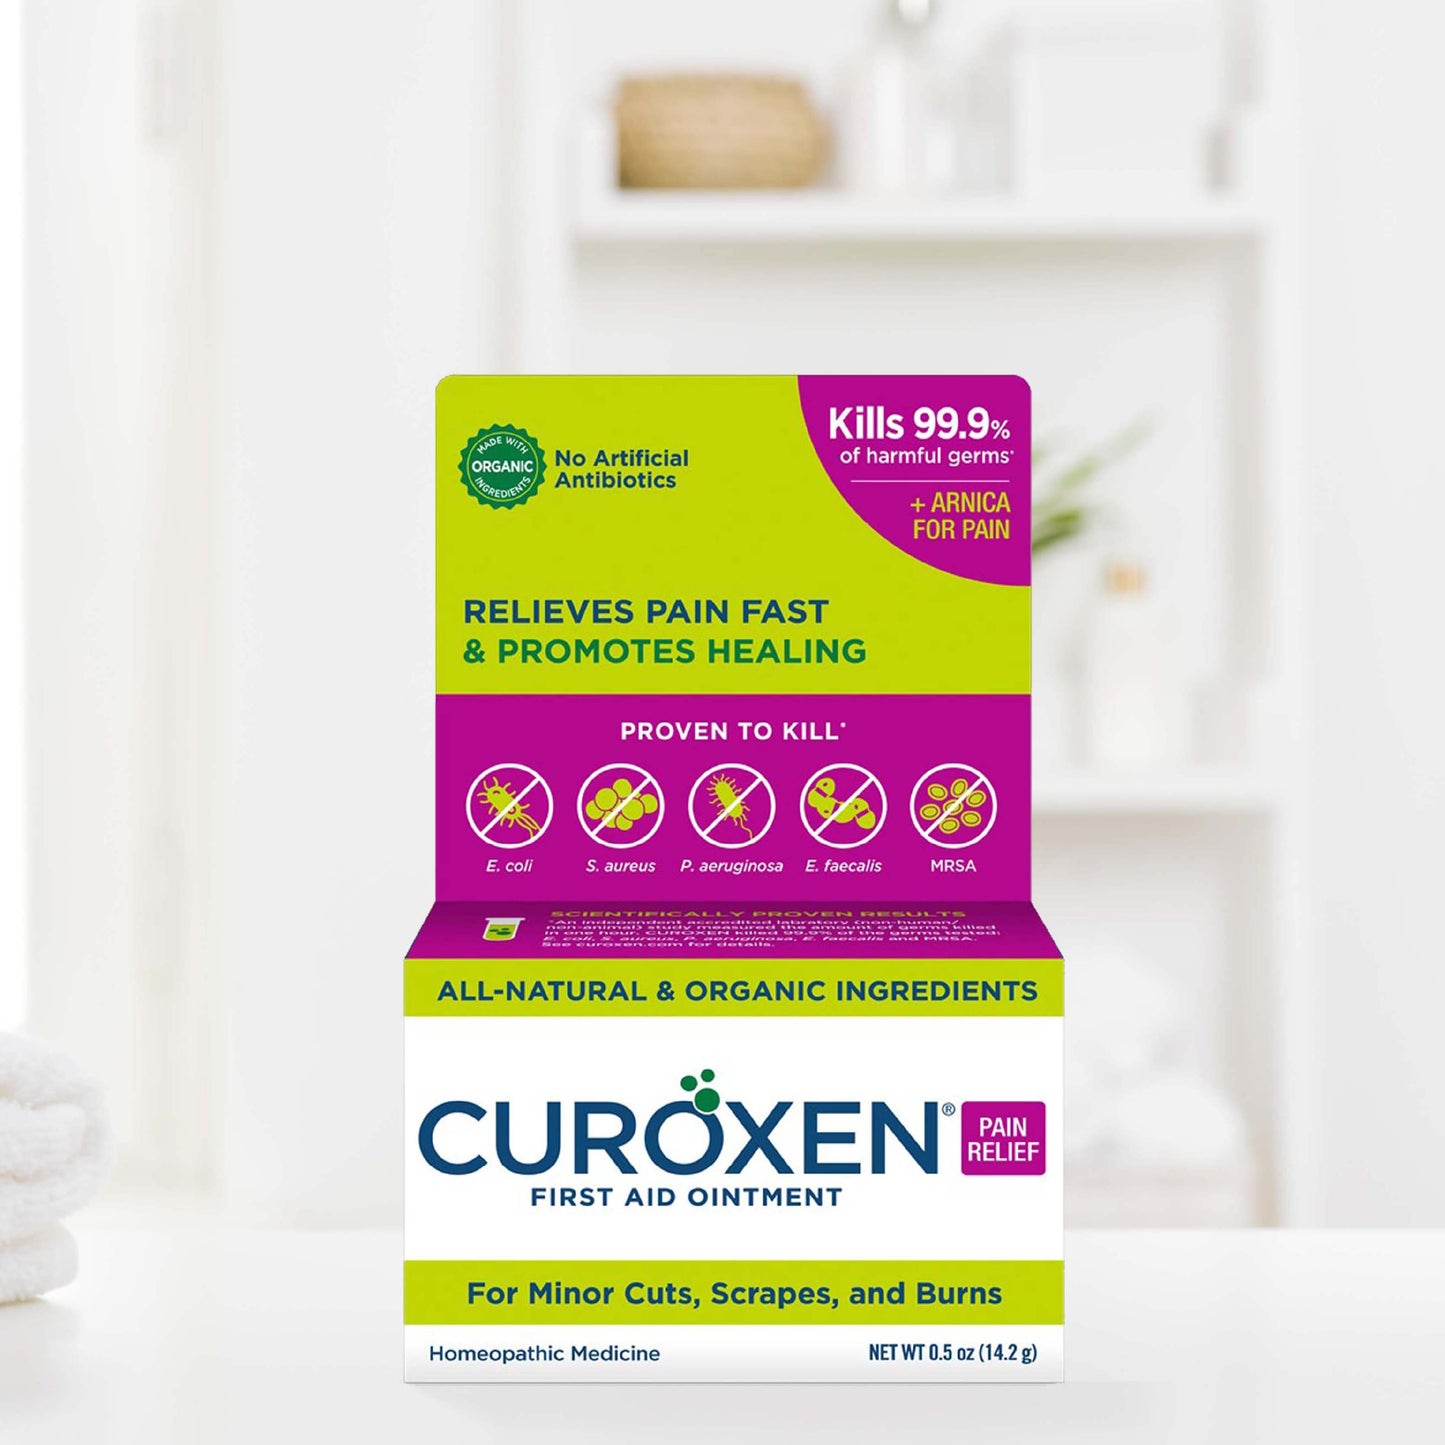 Curoxen First Aid Ointment: Relieves pain fast and promotes healing. 